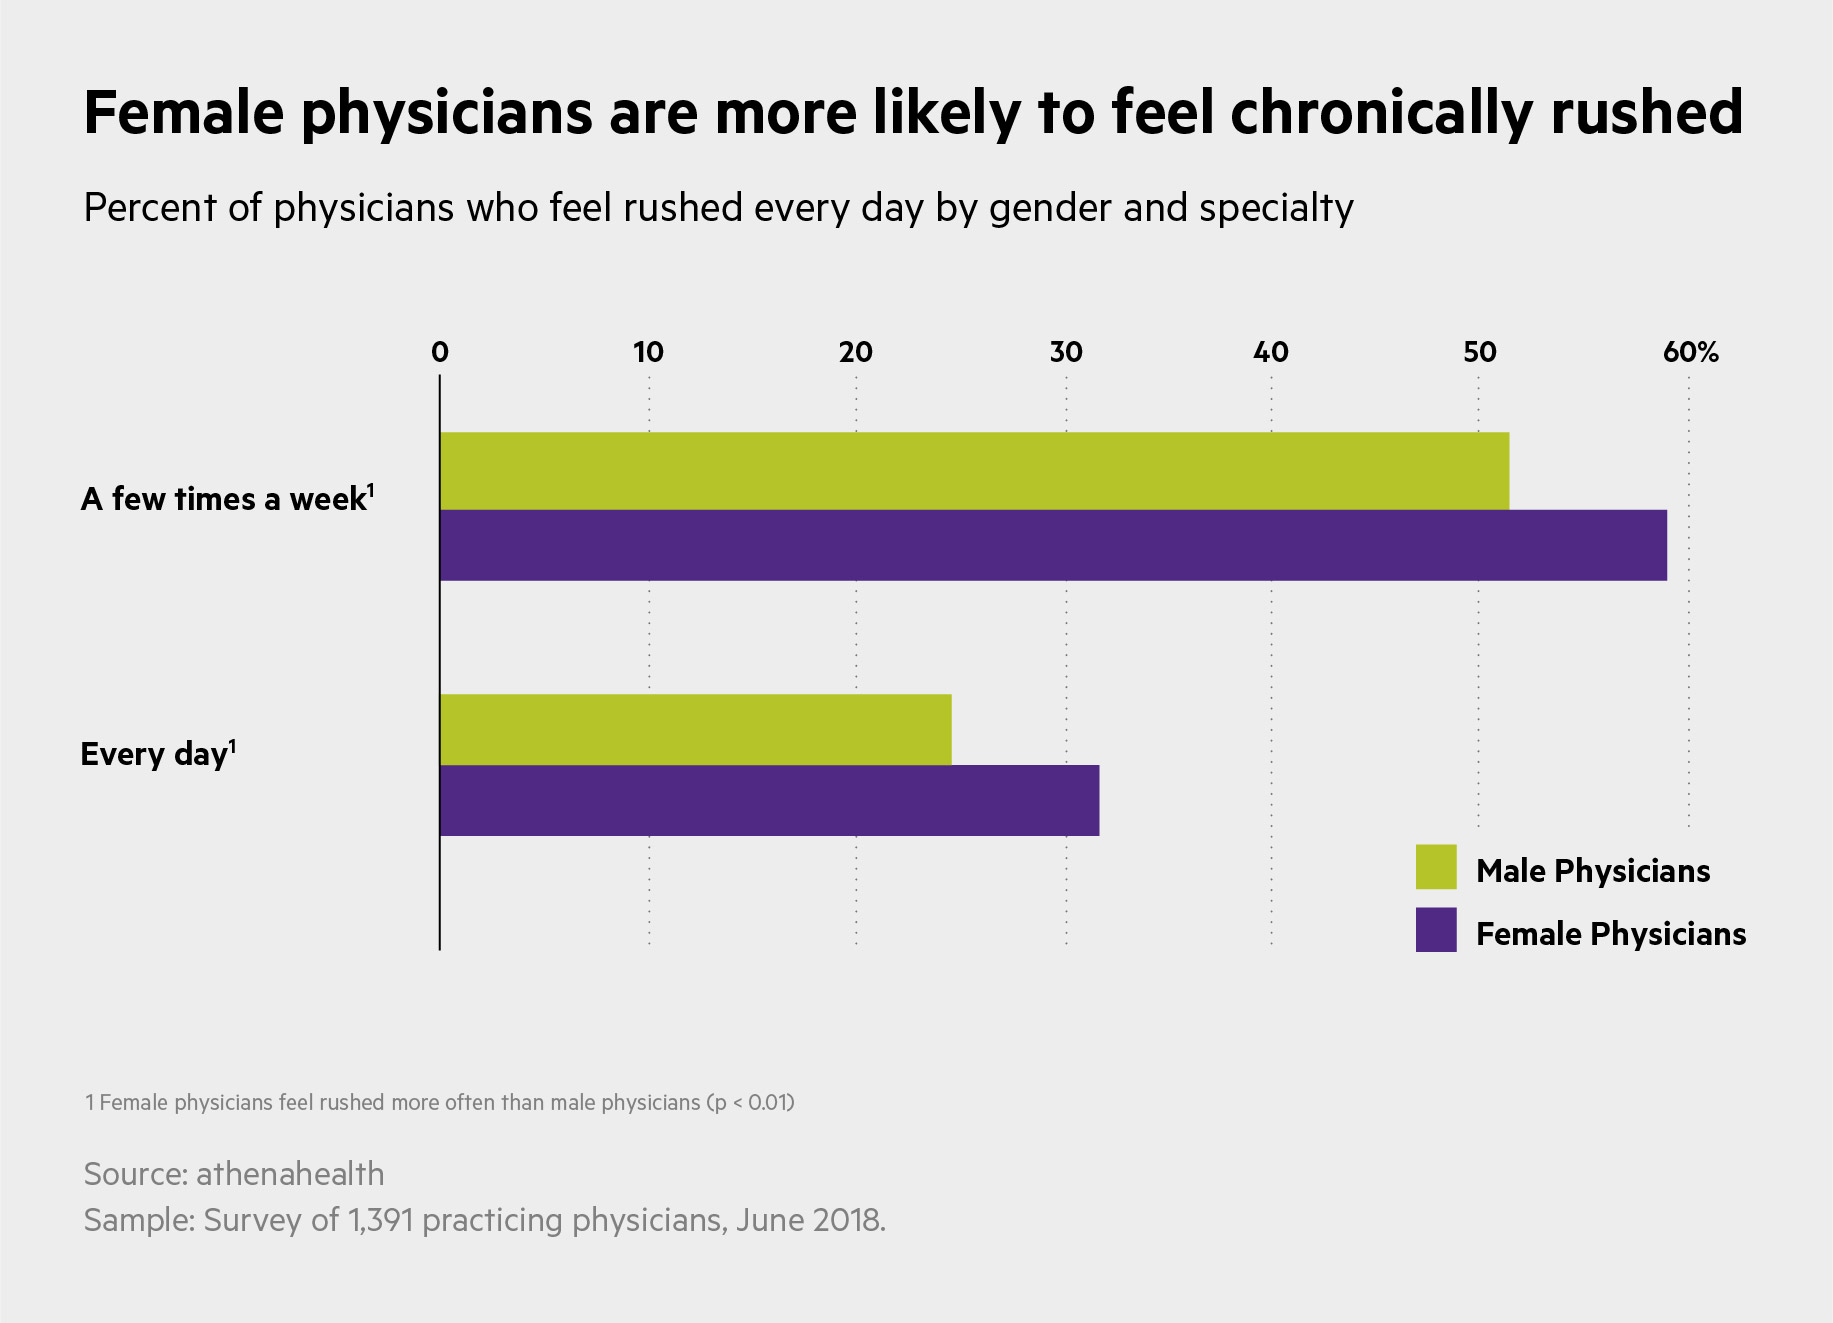 Bar chart showing female physicians are more likely to feel chronically rushed